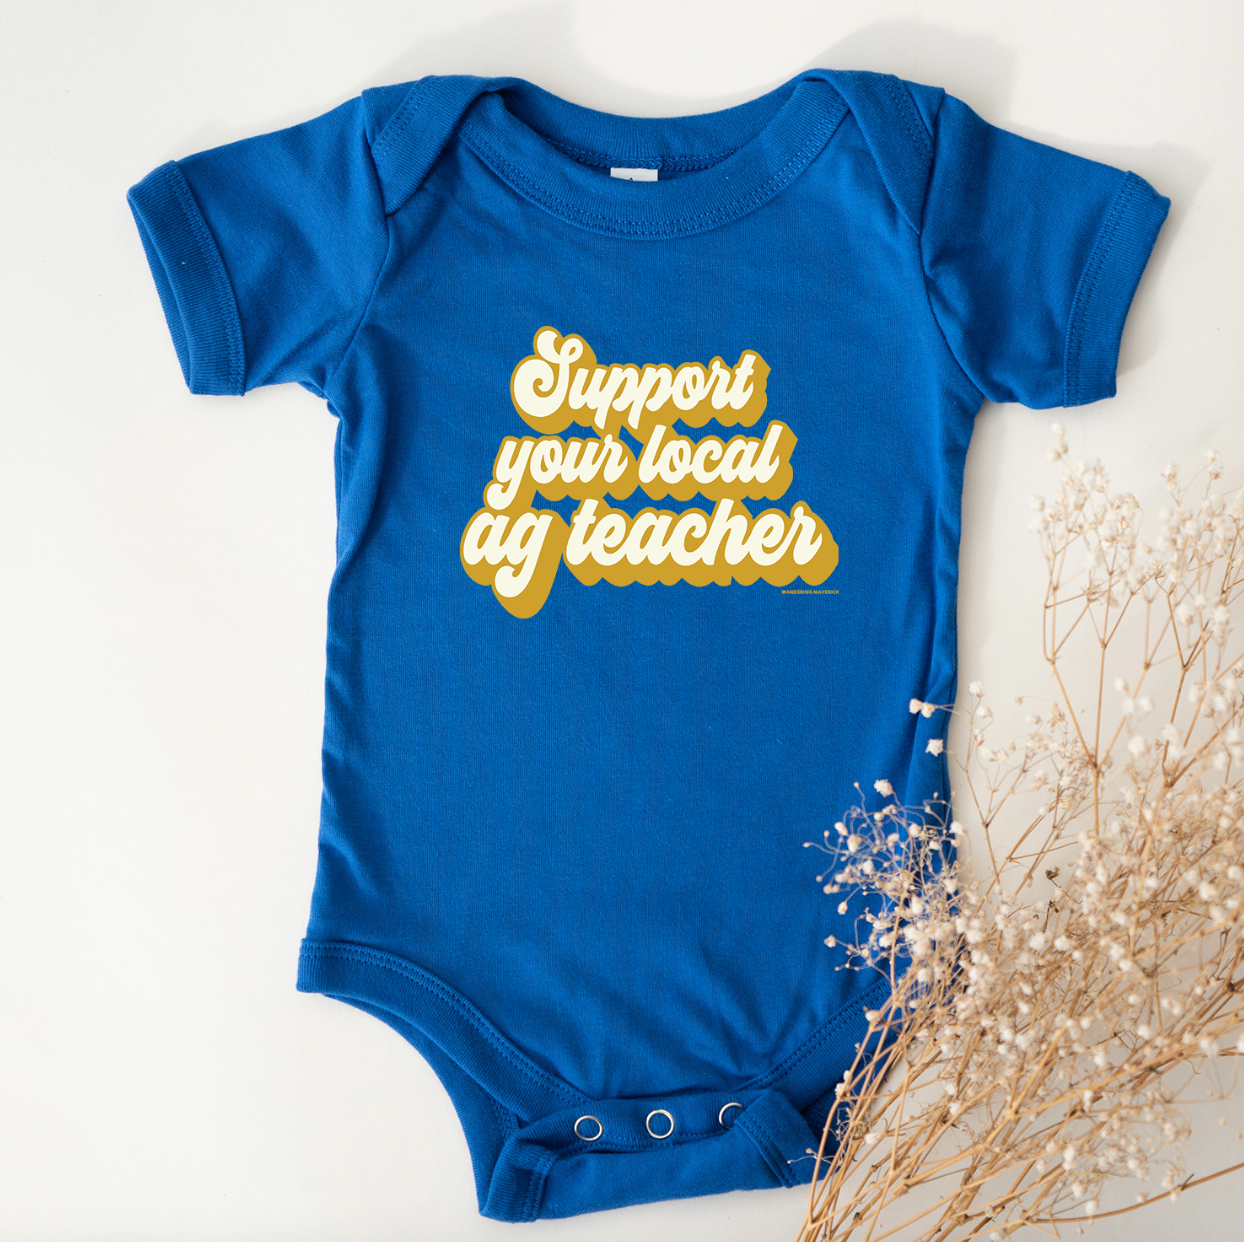 Retro Support Your Local Ag Teacher Gold One Piece/T-Shirt (Newborn - Youth XL) - Multiple Colors!